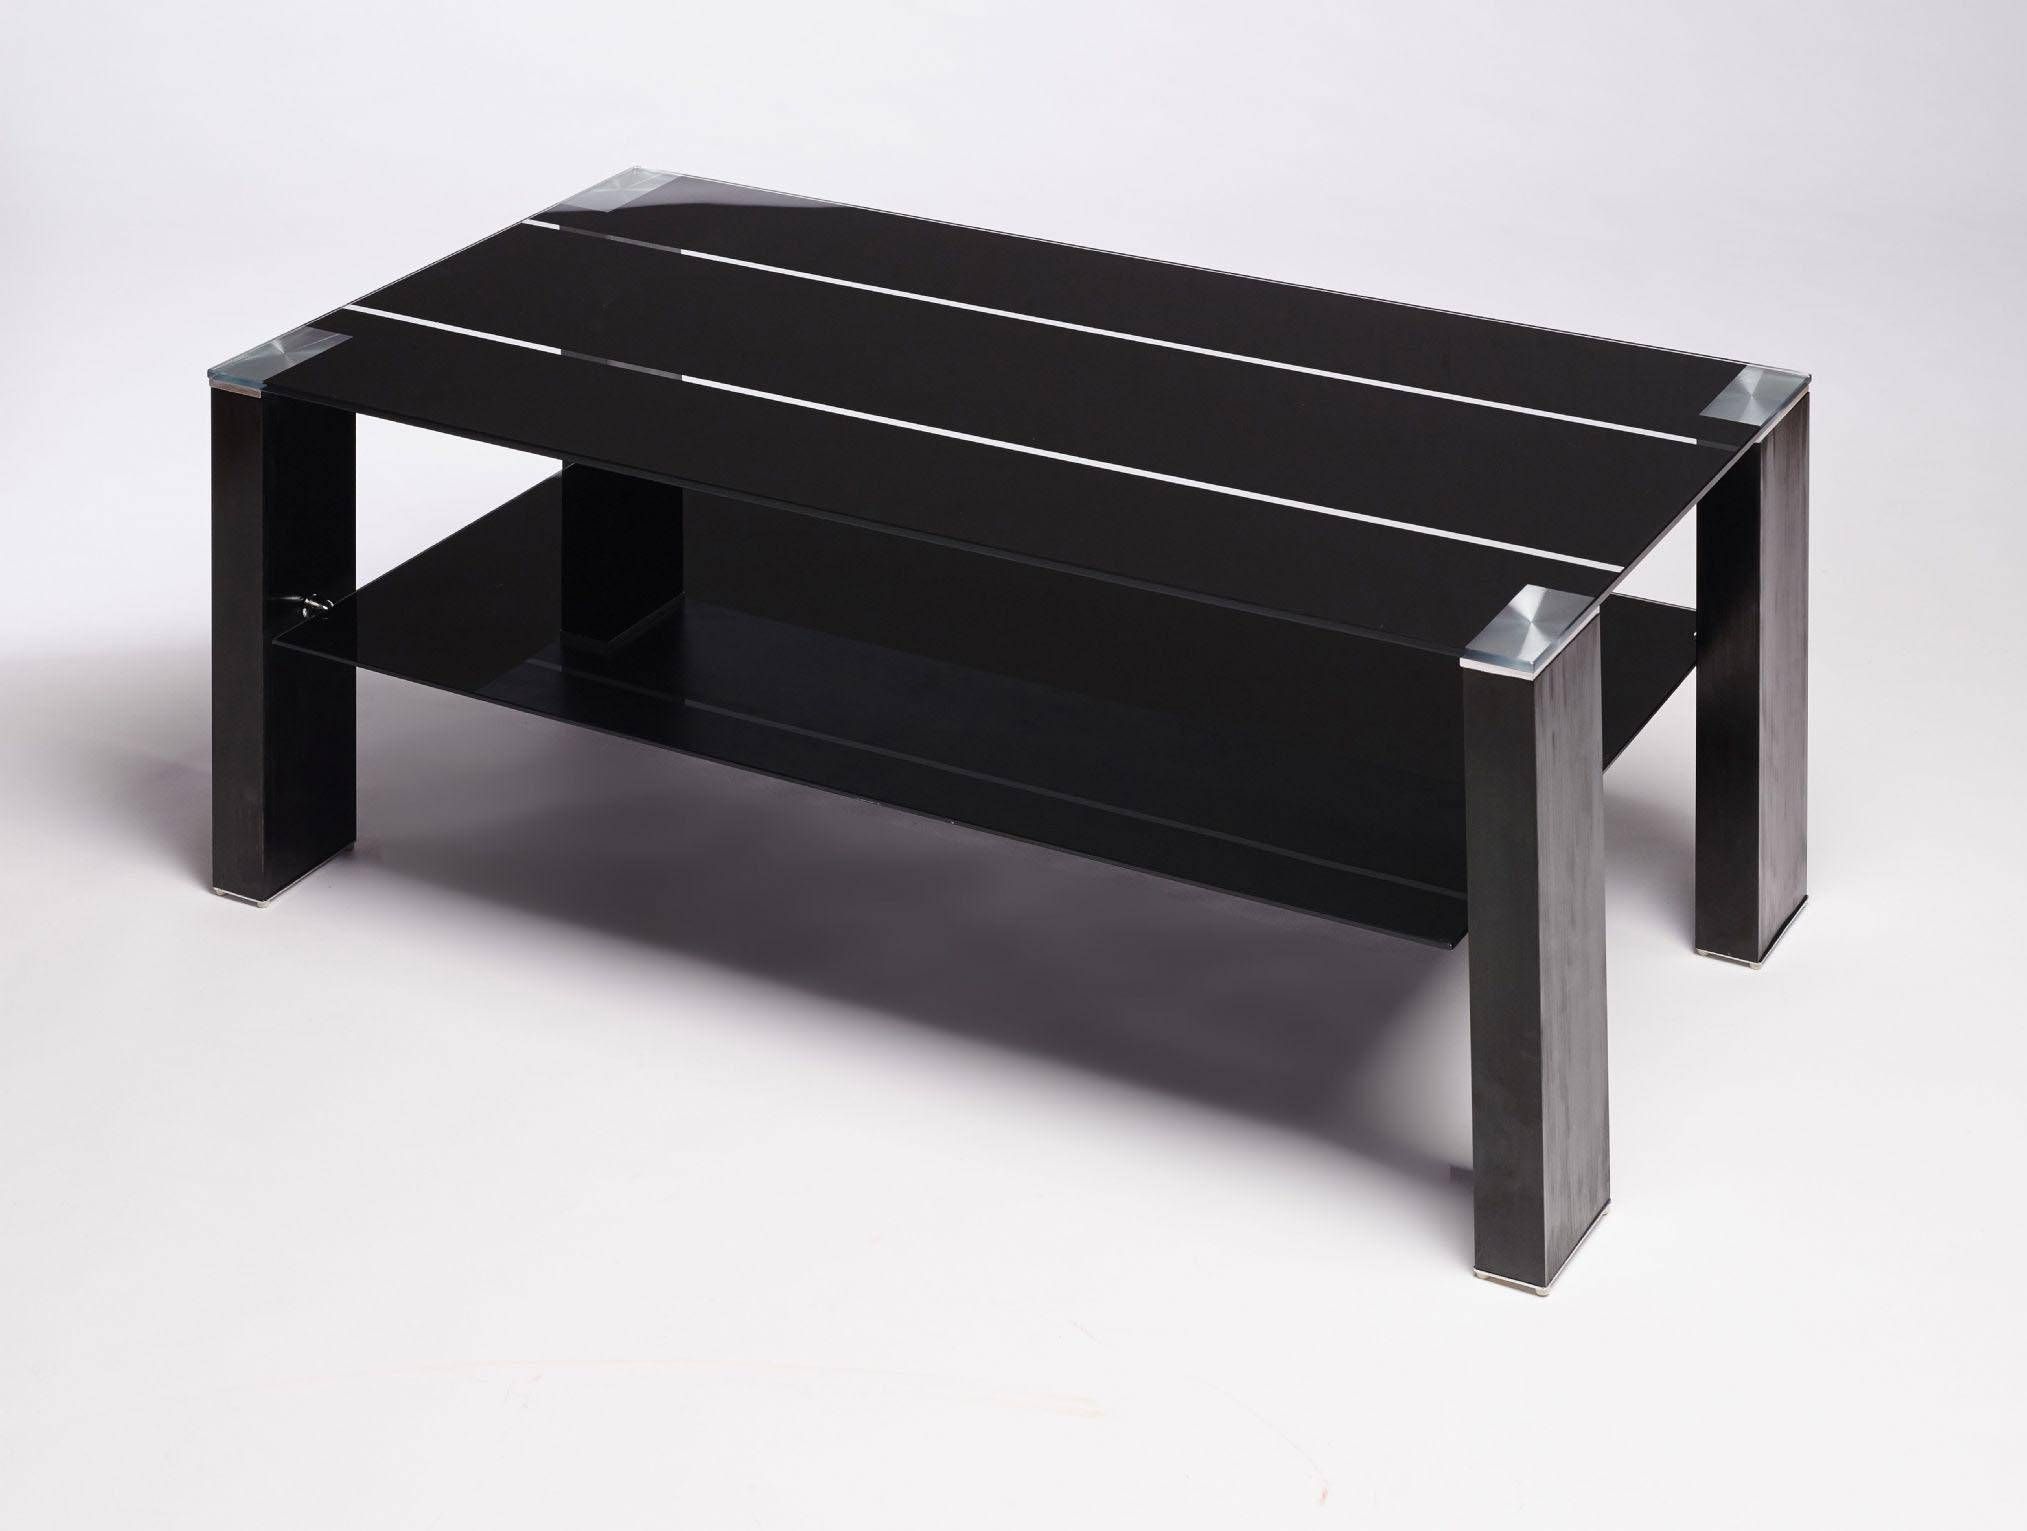 Black Glass Coffee Table Contemporary Modern Retro | Coffee Tables Regarding Retro Glass Coffee Tables (View 15 of 30)